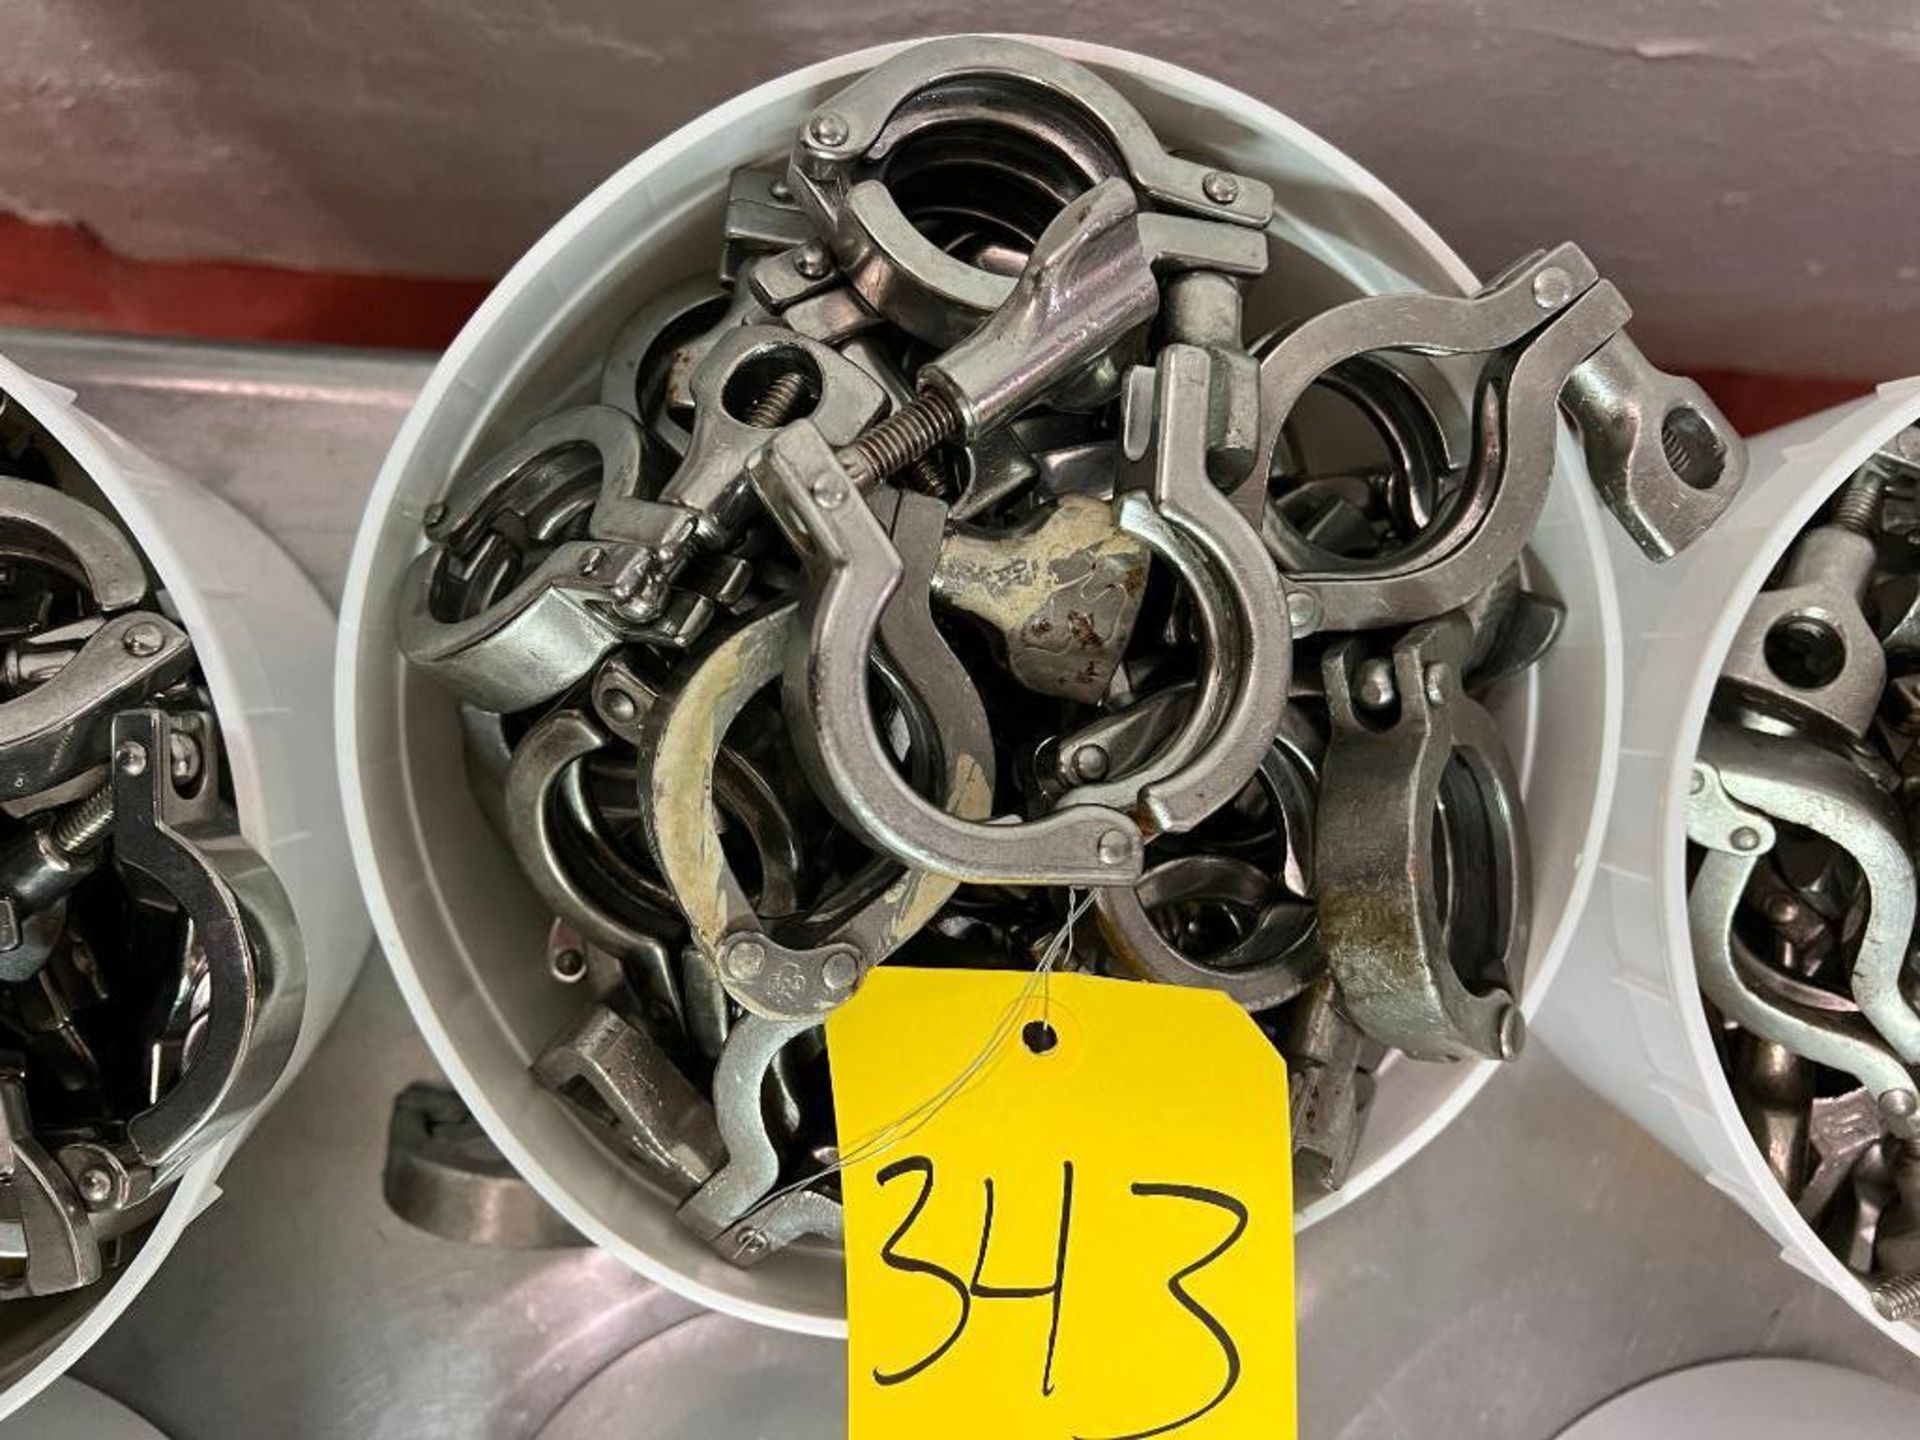 1.5" S/S Clamps - Rigging Fee: $25